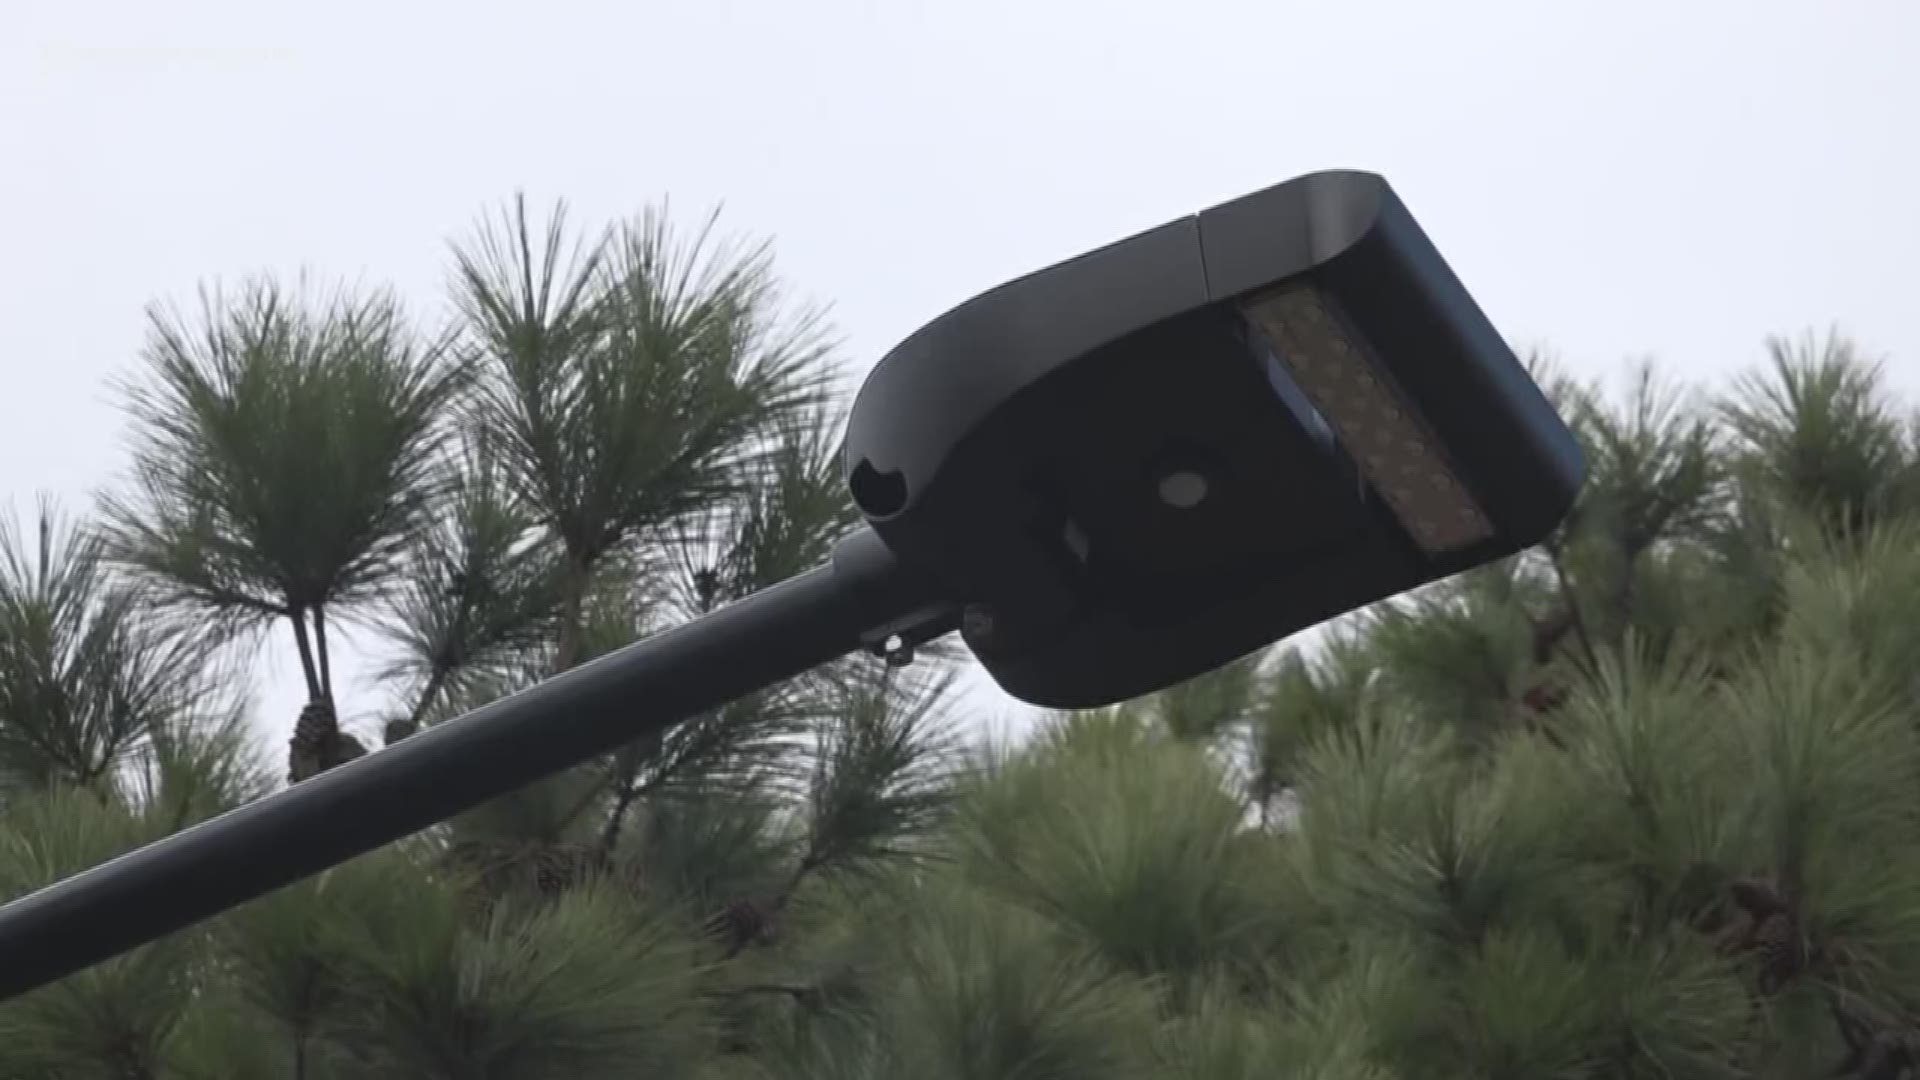 The city of Hampton is in store for some upgraded light poles that can give you WiFi access, a place to charge your phone and security cameras.